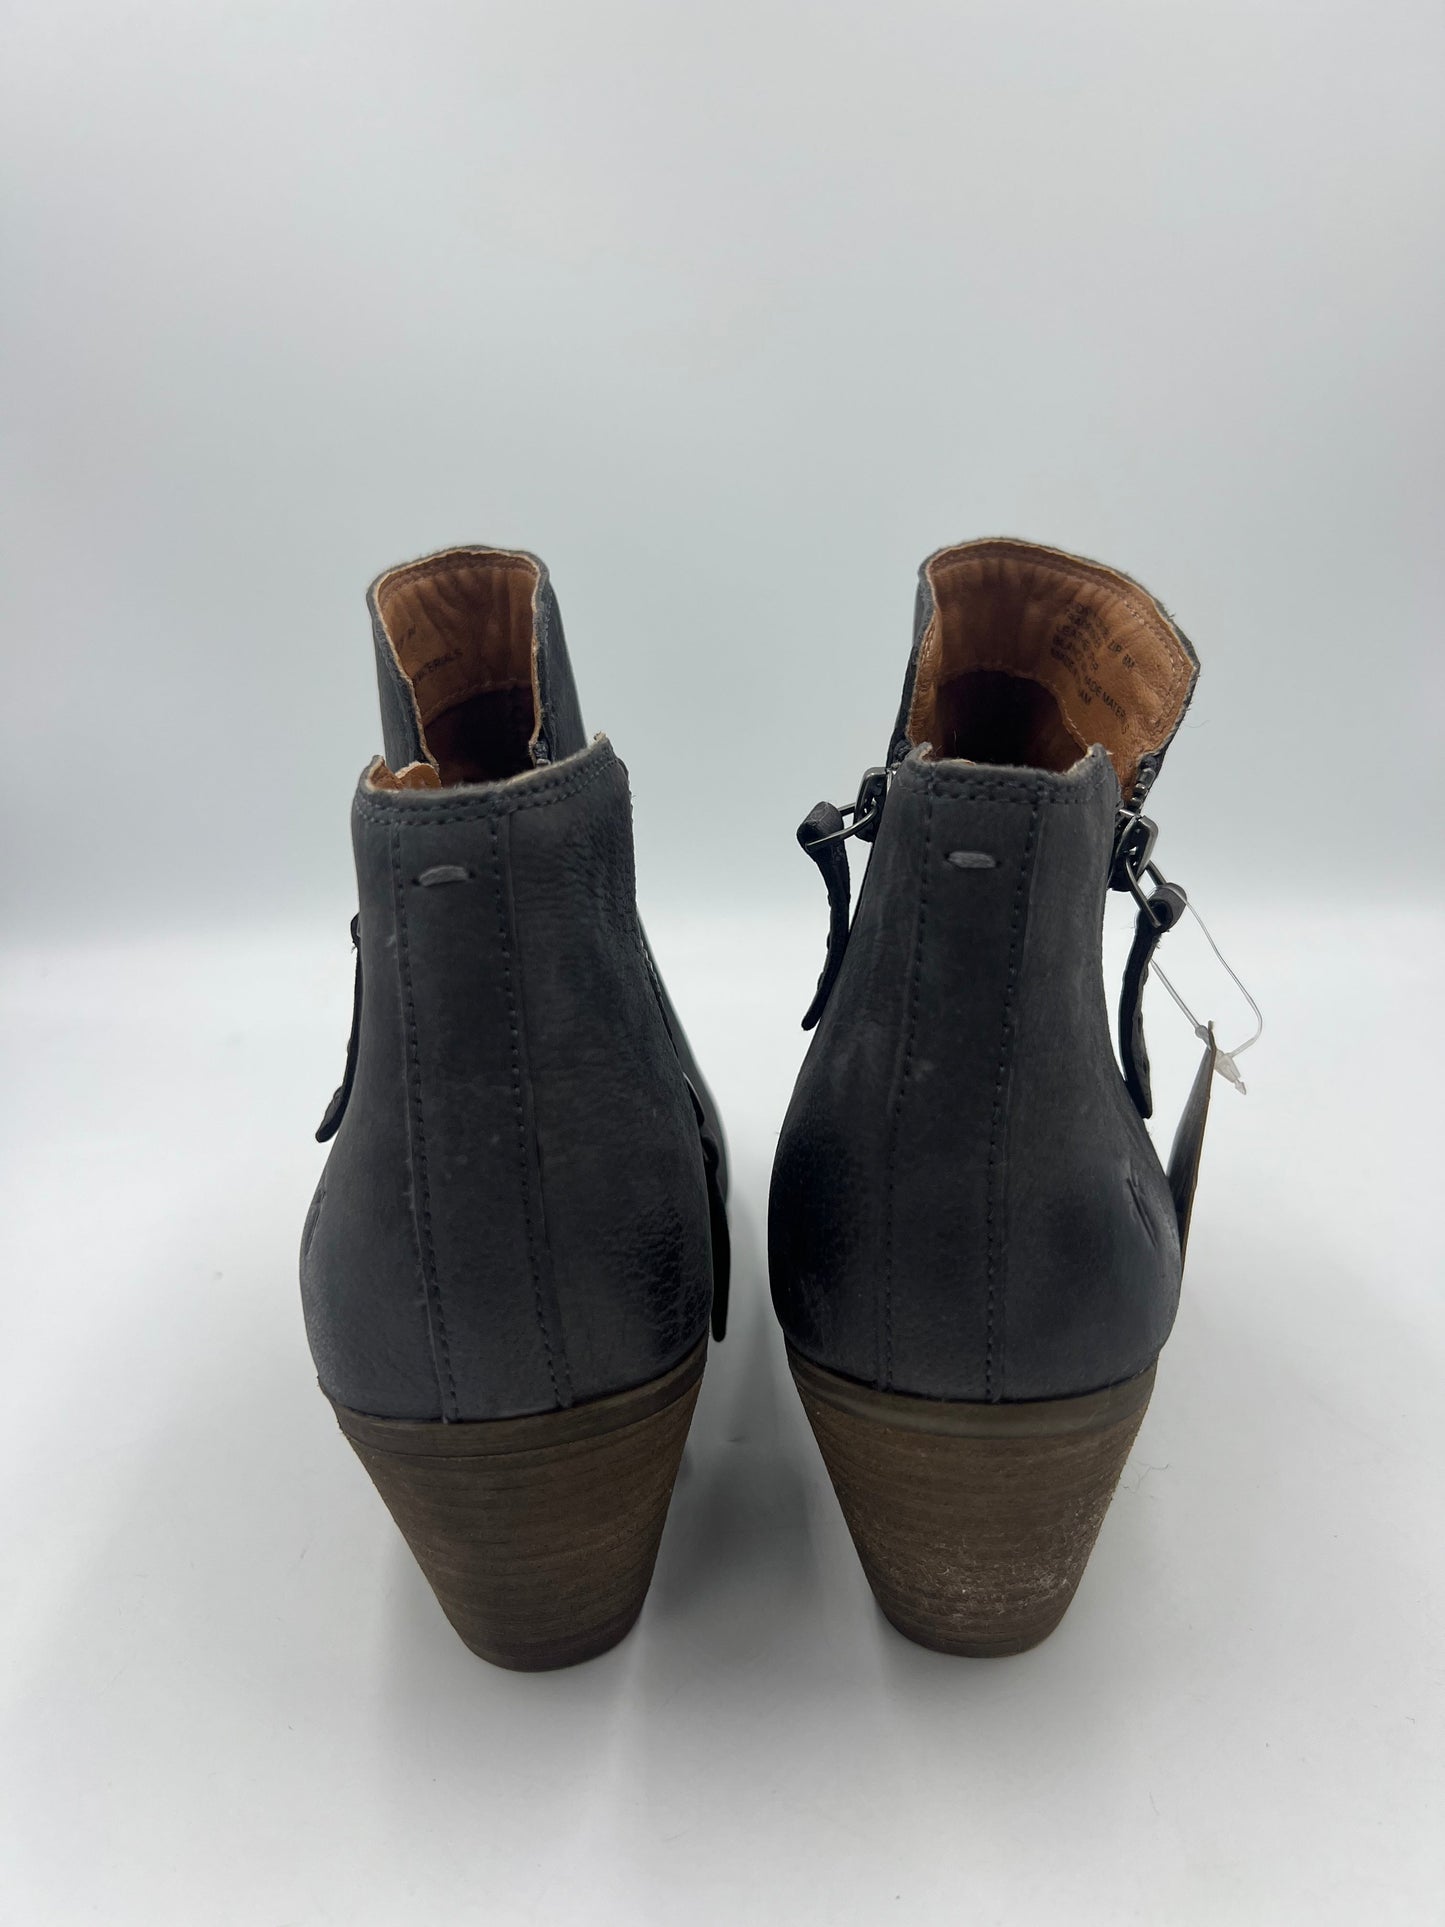 New! Boots Designer By Frye  Size: 8